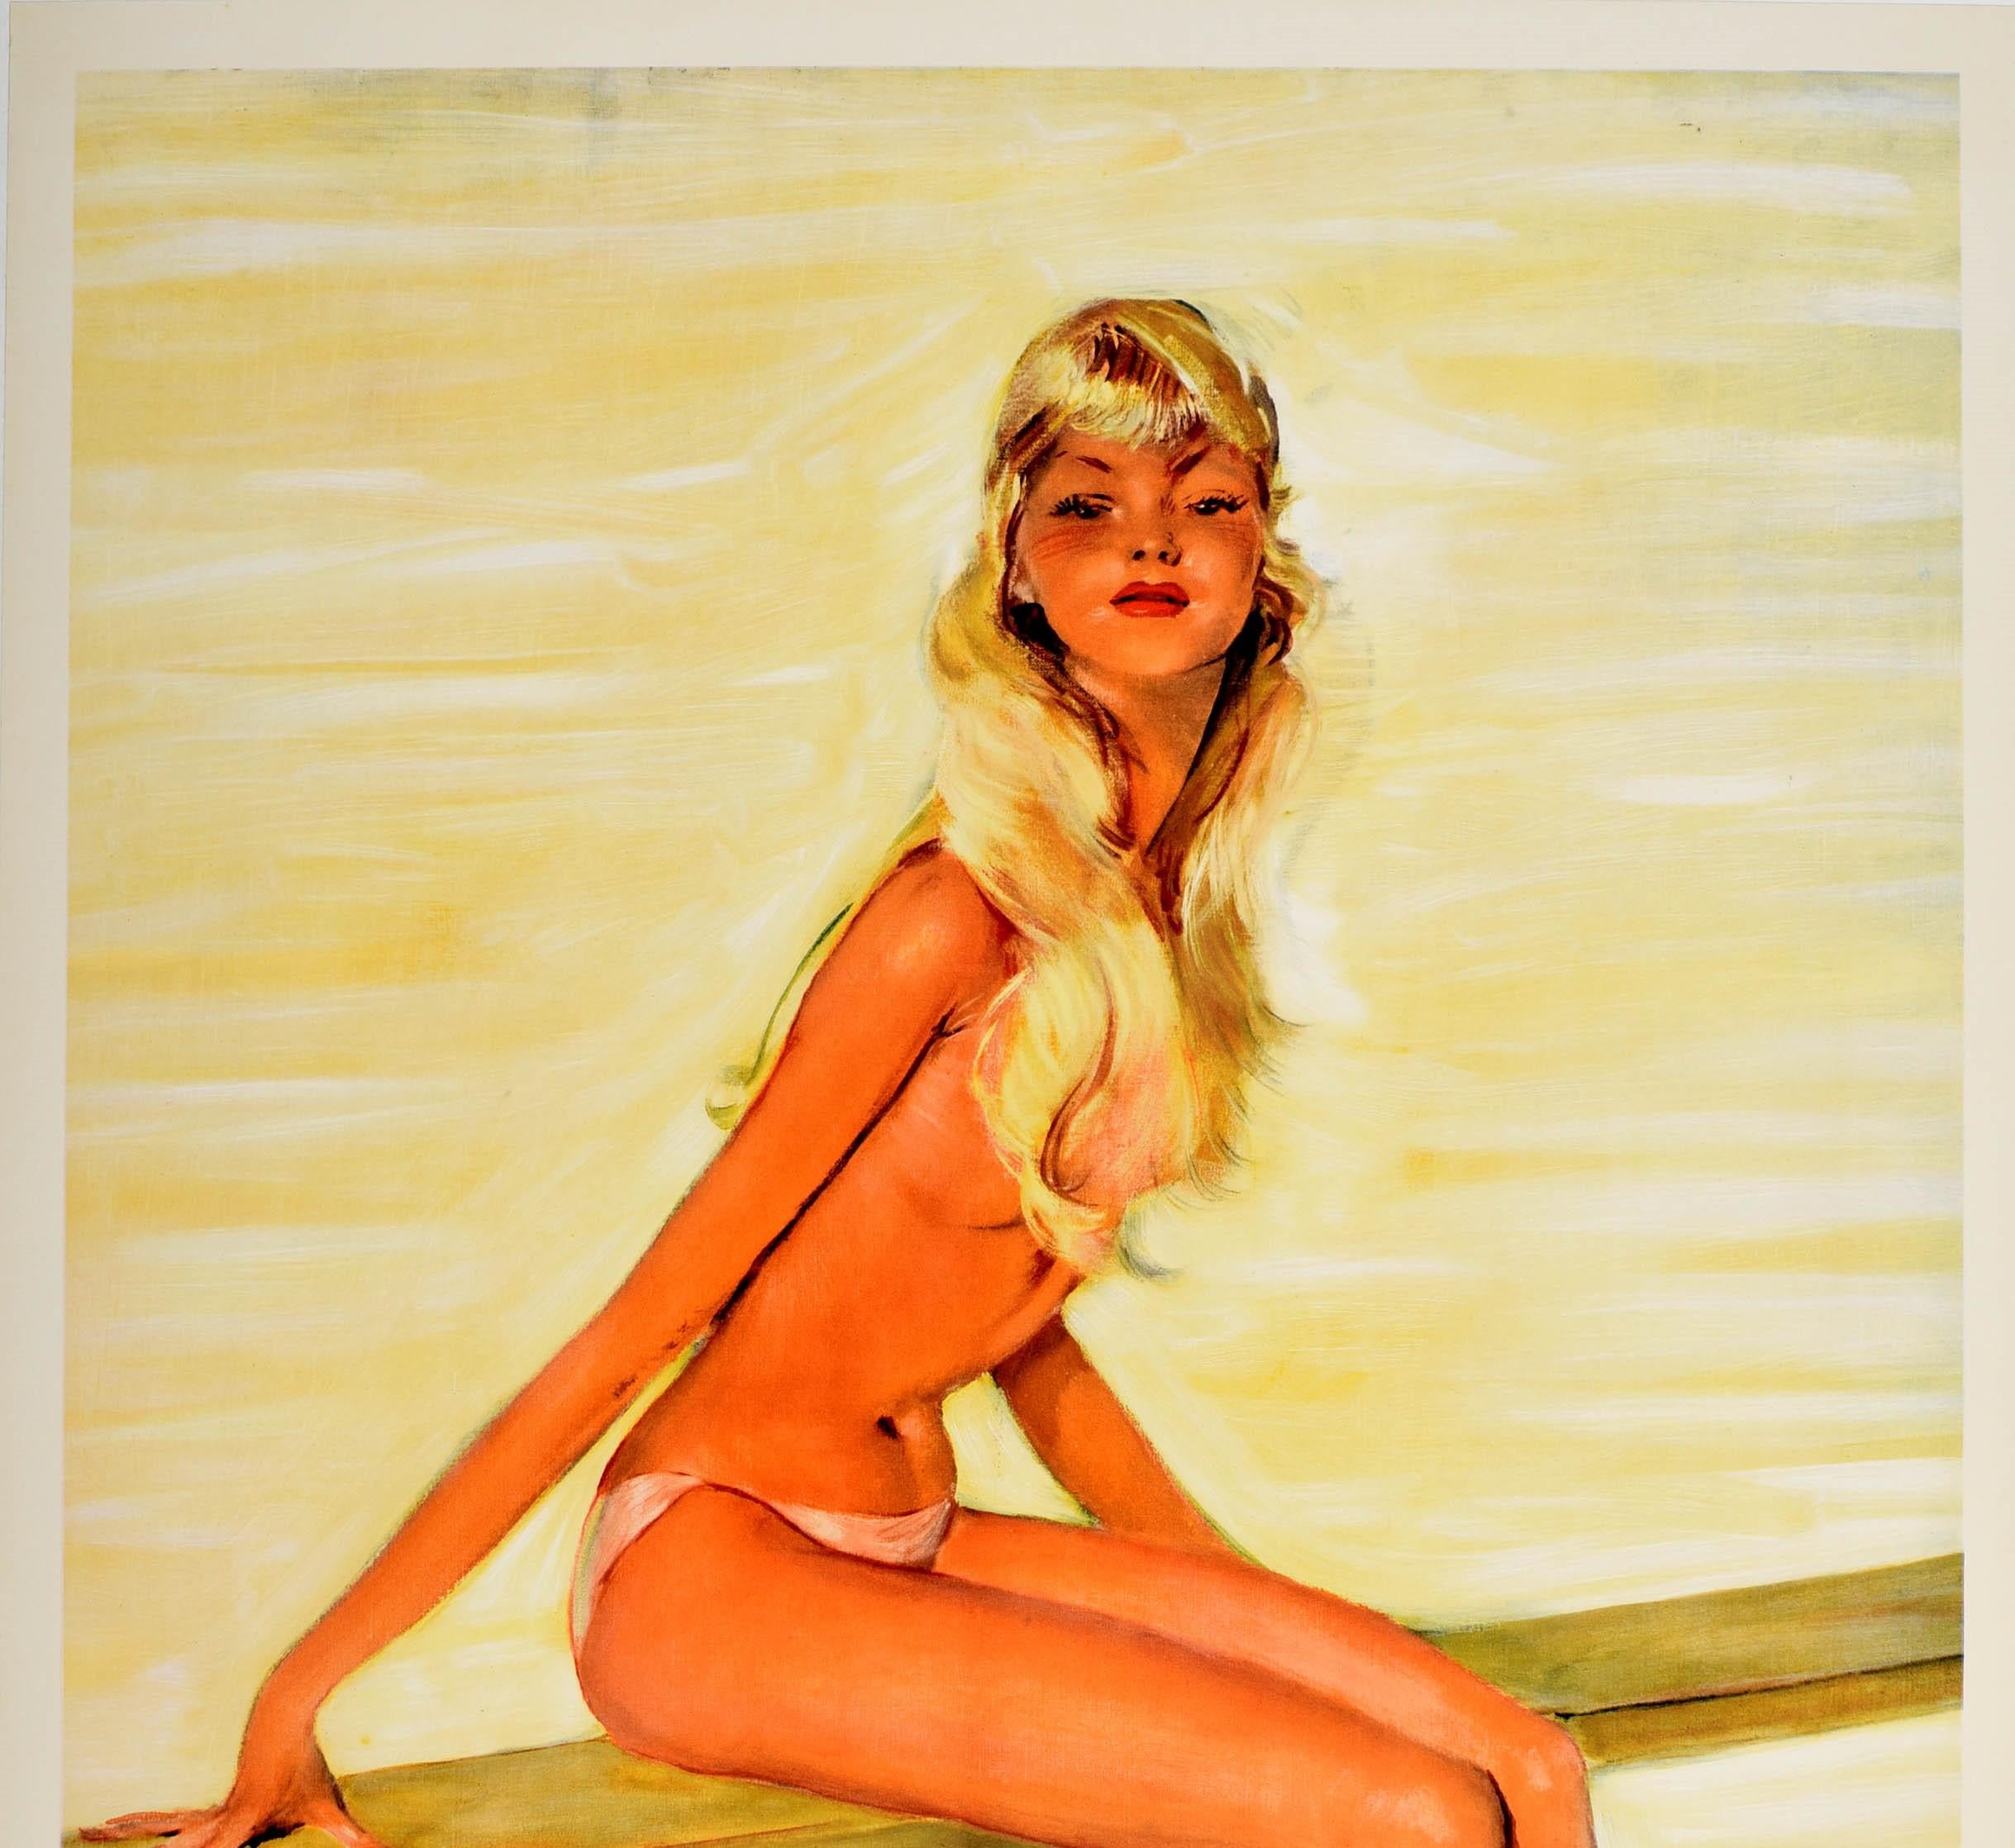 Original vintage travel poster for Monte Carlo featuring an elegant pin-up style image by the French painter Jean Gabriel Domergue (1889-1962) of a young blonde lady sitting on a diving board and looking out to the viewer against a yellow shaded